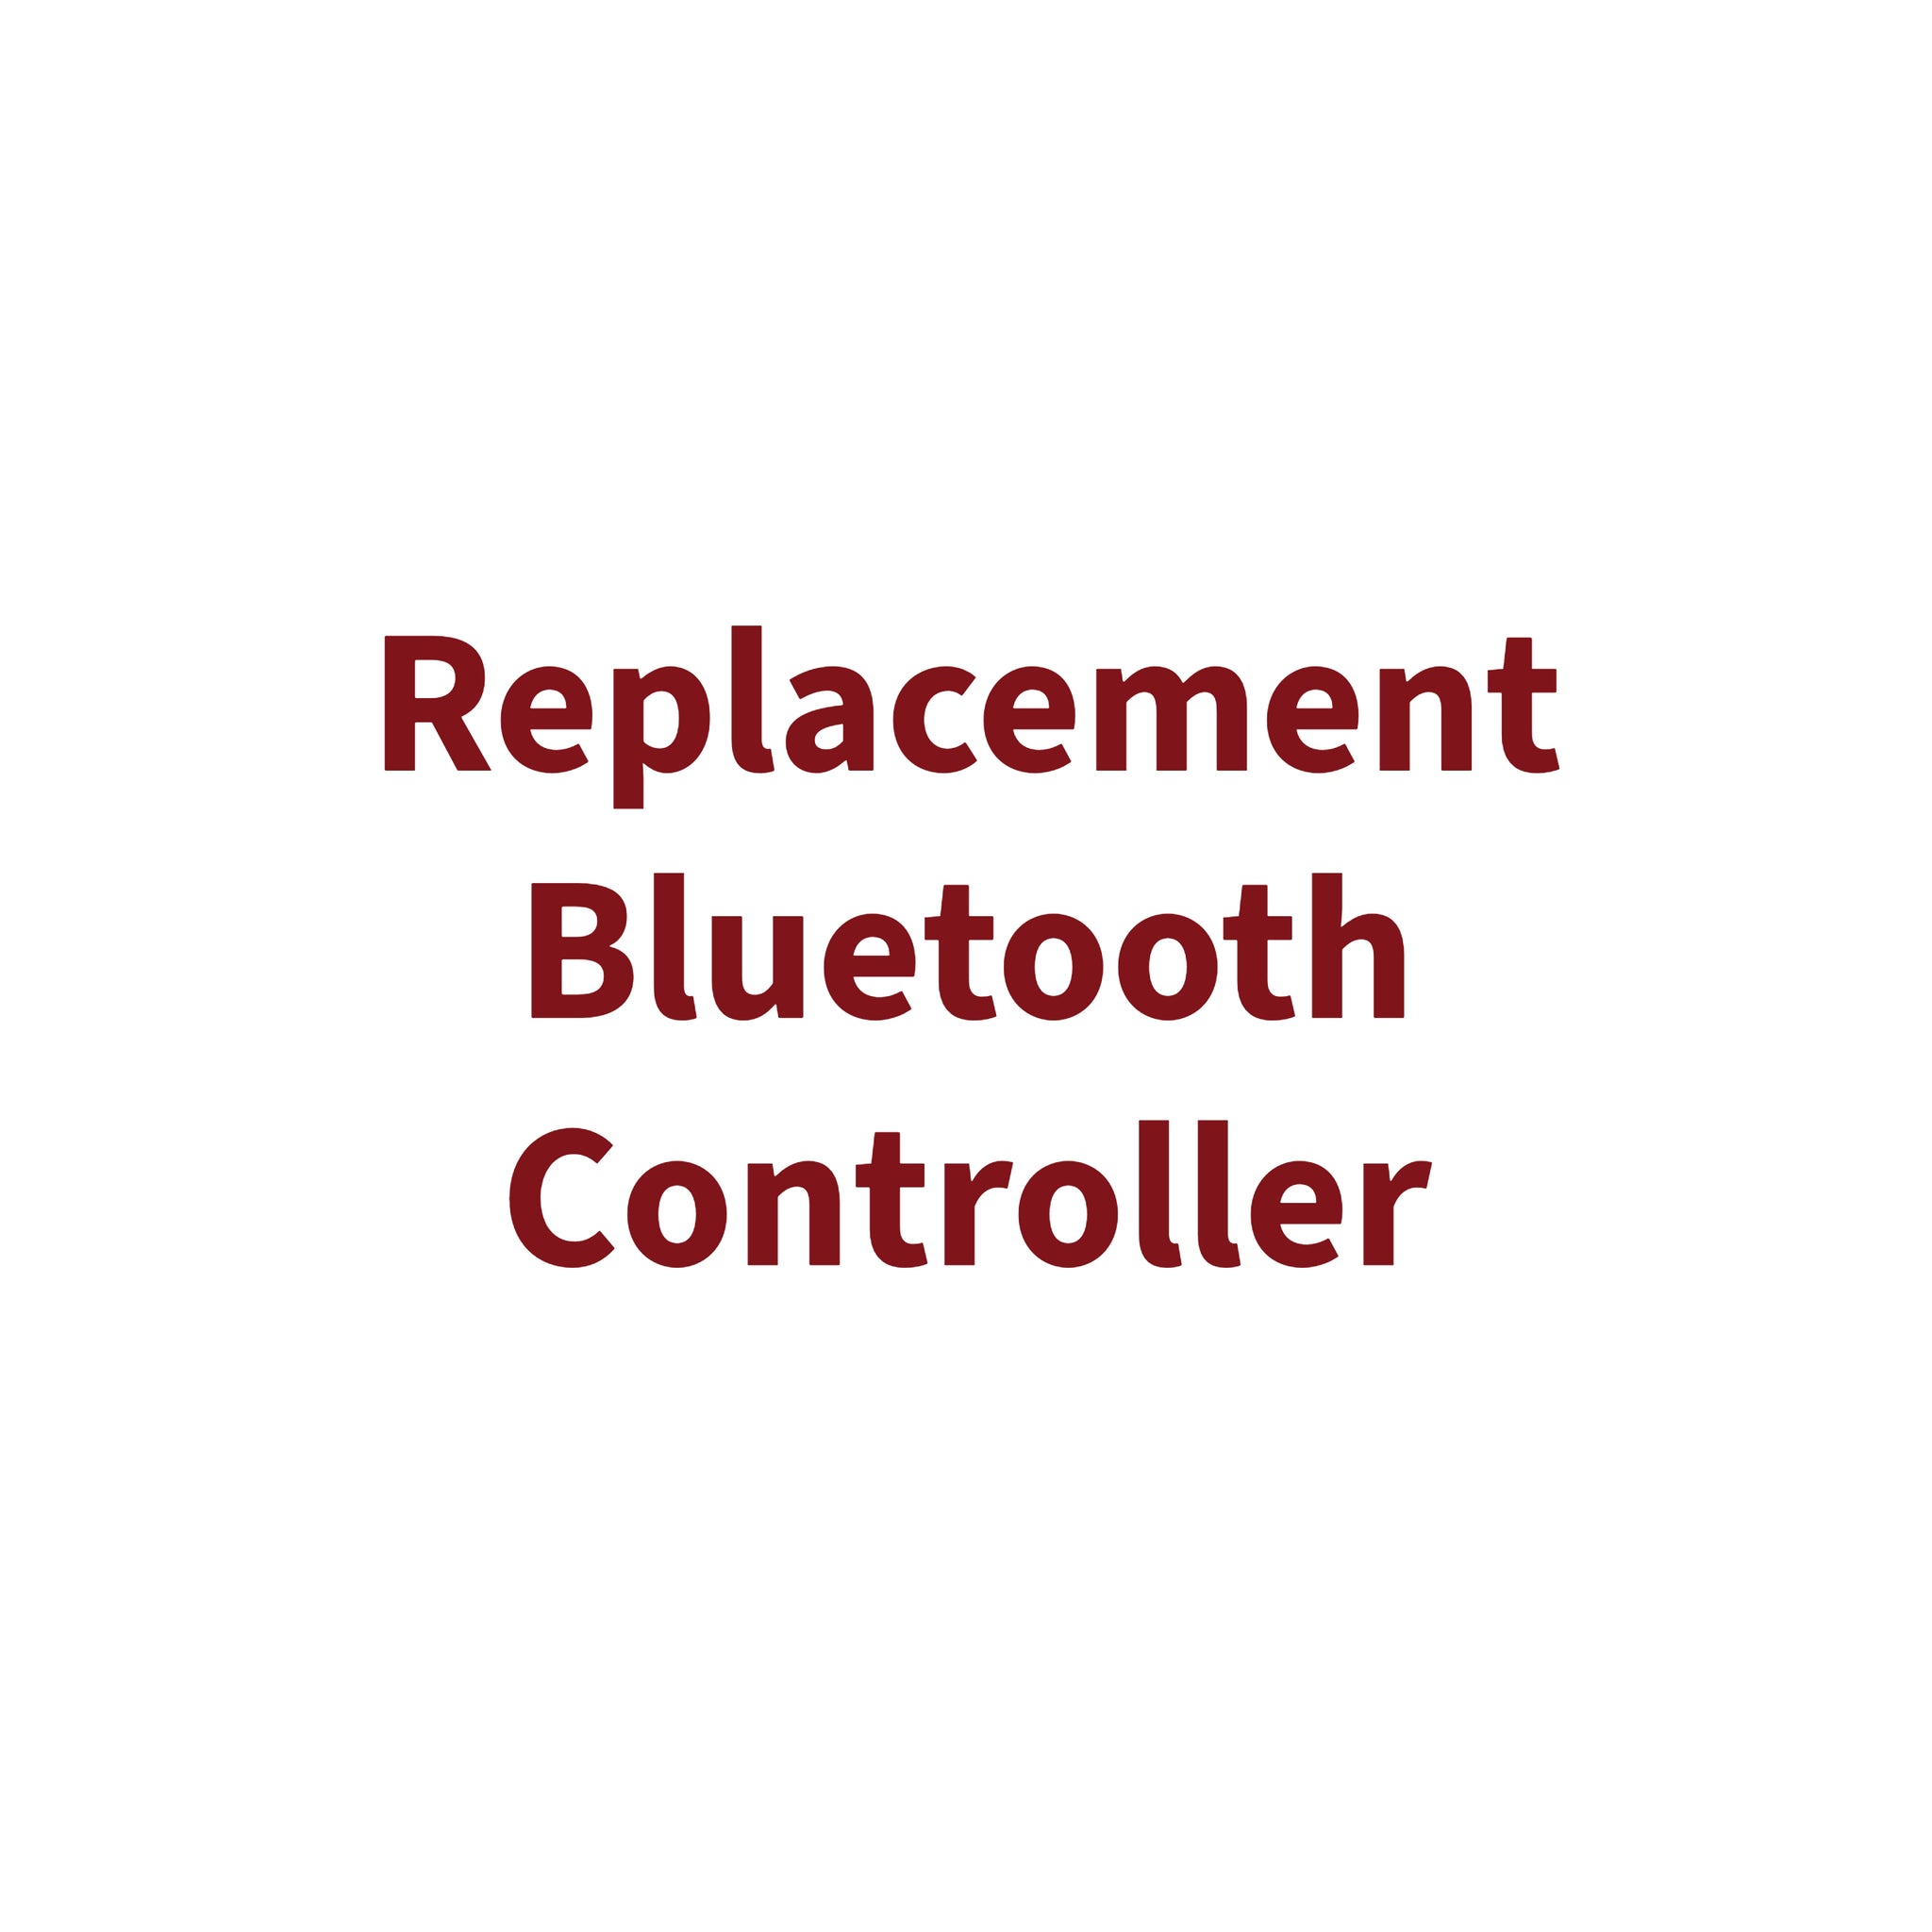 Replacement Bluetooth Controller